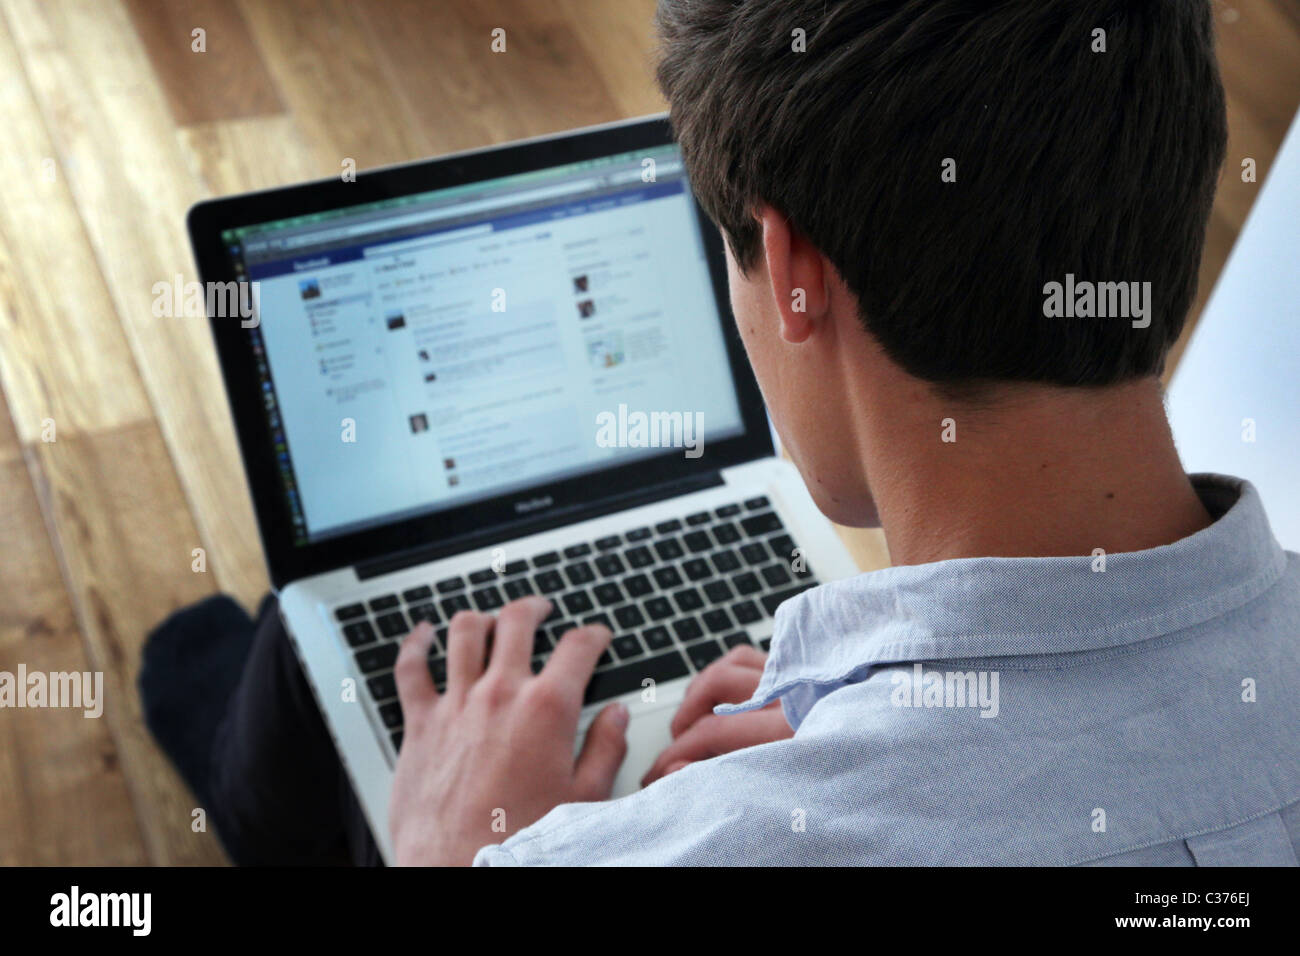 Over the shoulder shot of a young man using his laptop on a facebook page. Stock Photo